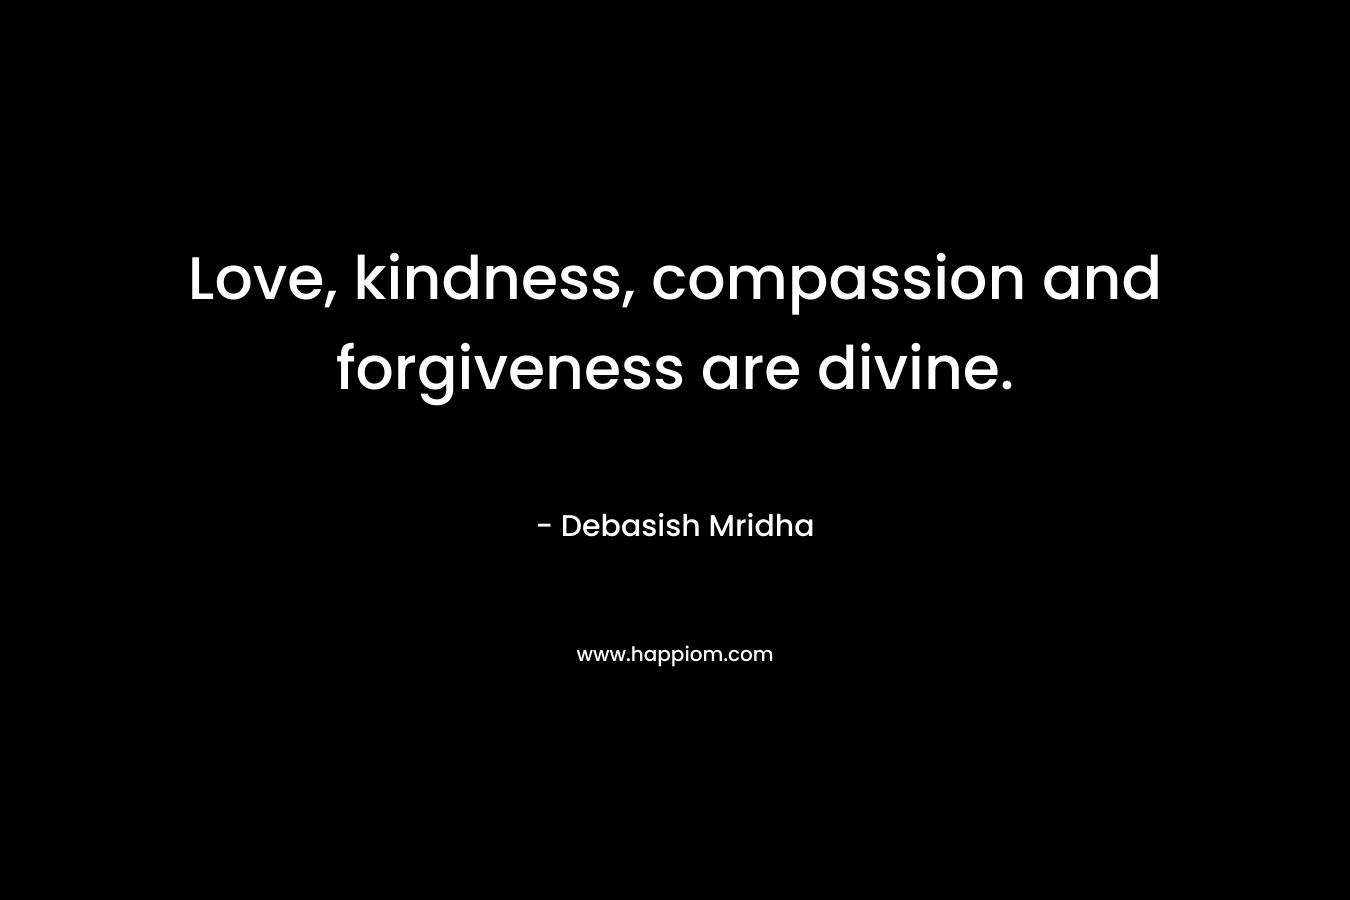 Love, kindness, compassion and forgiveness are divine.